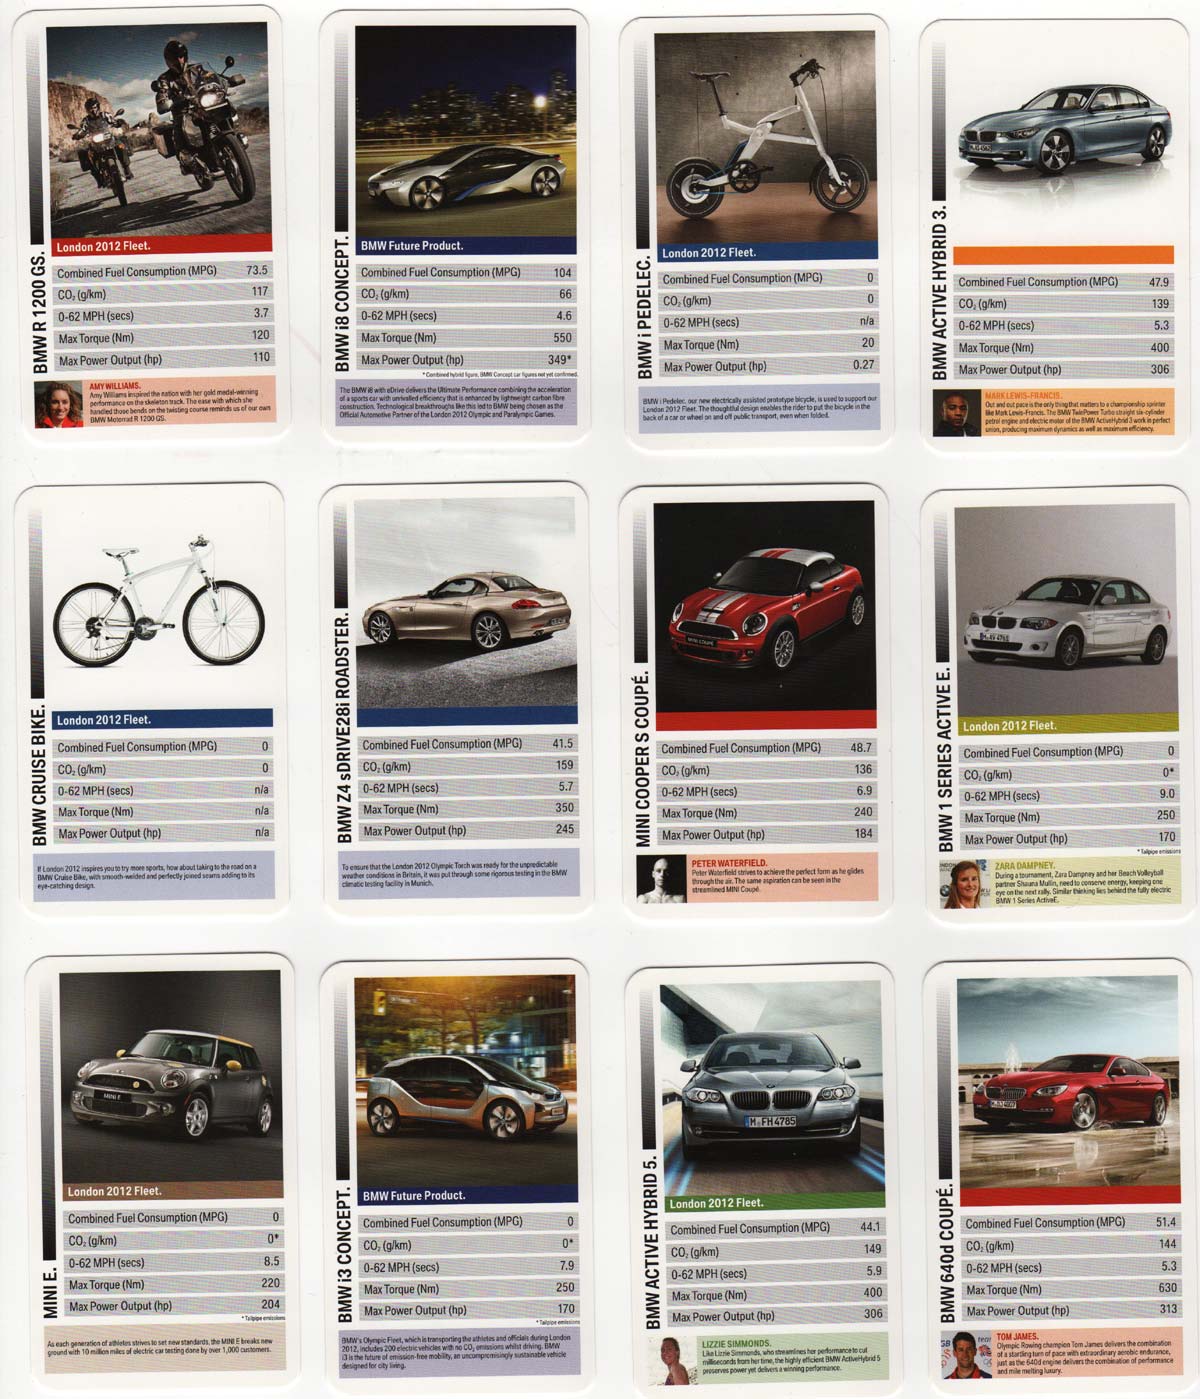 BMW Promo Top Trumps produced as promotion for the London 2012 Olympic Games